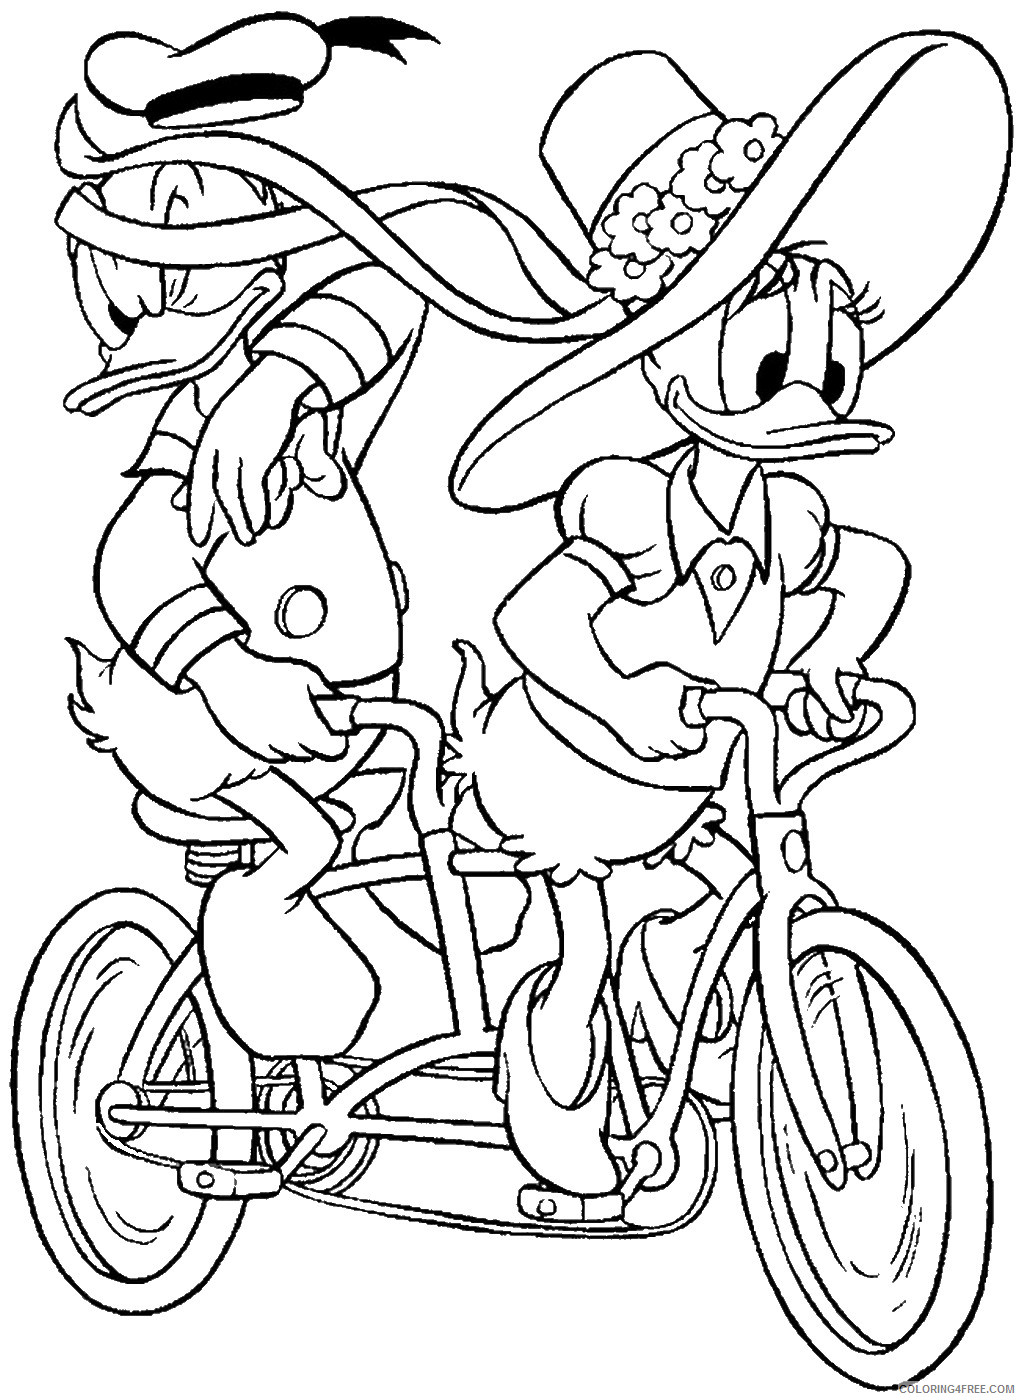 Donald and Daisy Duck Coloring Pages Cartoons donald_35 Printable 2020 2470 Coloring4free